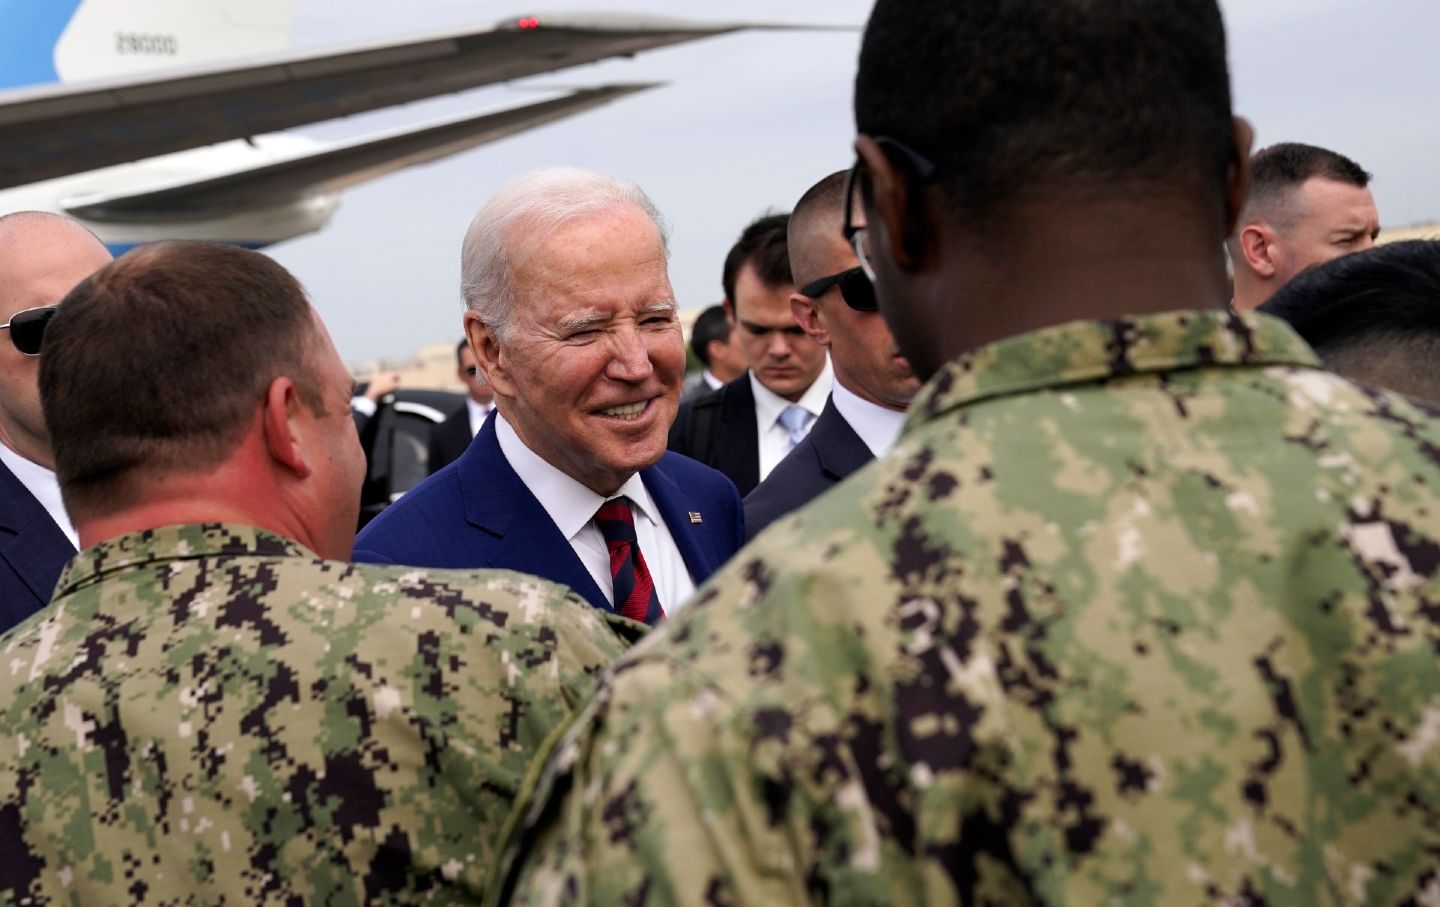 Biden smiling, surrounded by military March 2023